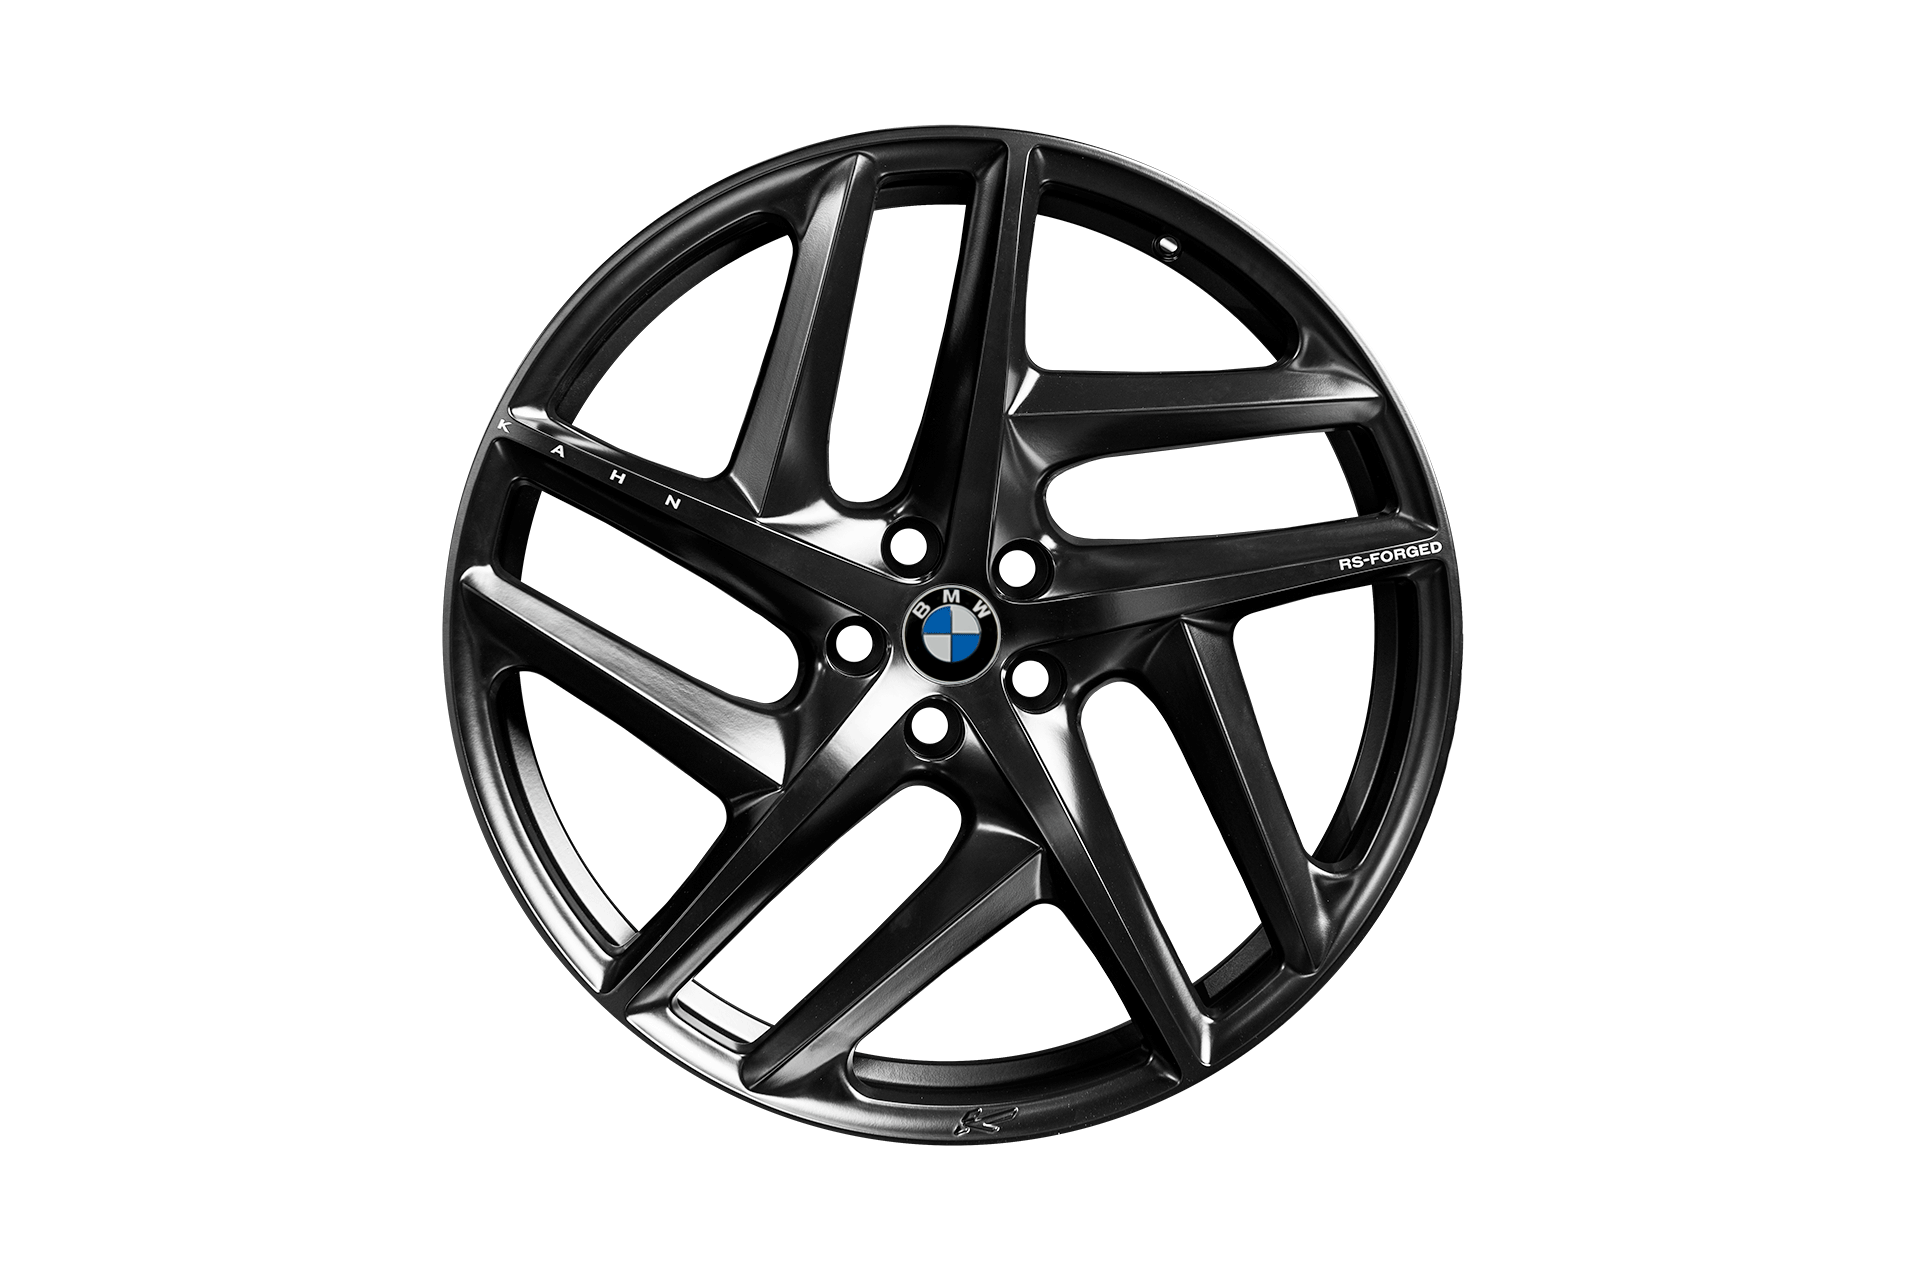 Type 52 RS-Forged Alloy Wheels suitable for BMW i8 (2014 – present)